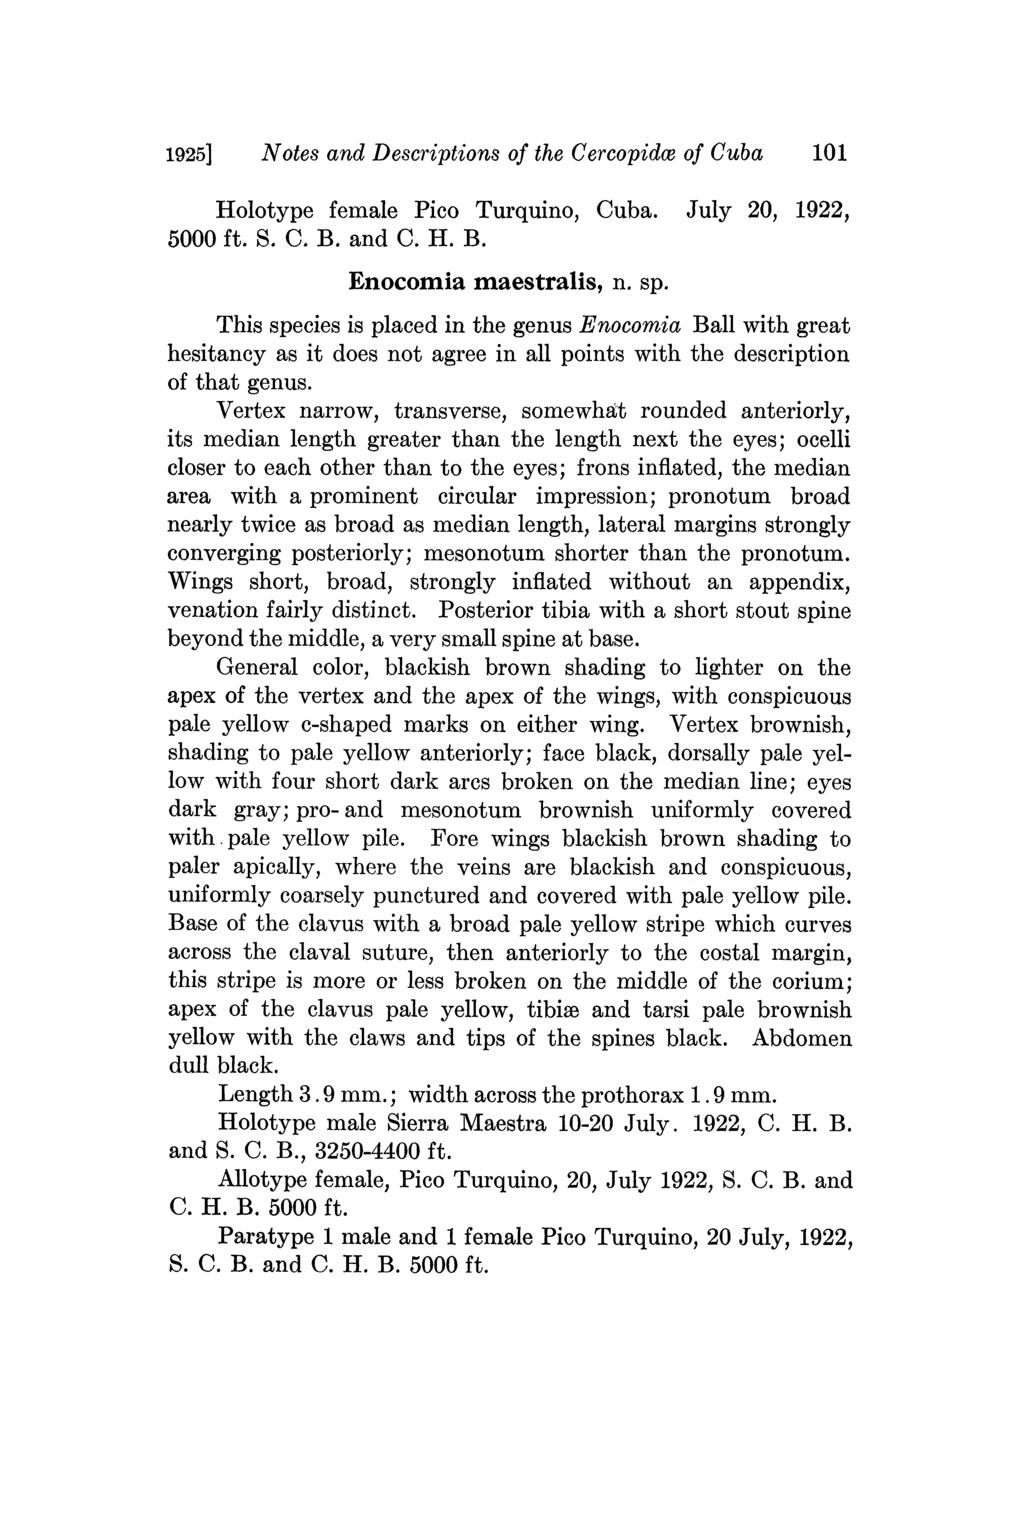 1925] Notes and Descriptions of the Cercopidce of Cuba 101 Holotype female Pico Turquino, Cuba. July 20, 1922, 5000 ft. S. C. B. and C. H. B. Enocomia maestralis, n. sp.